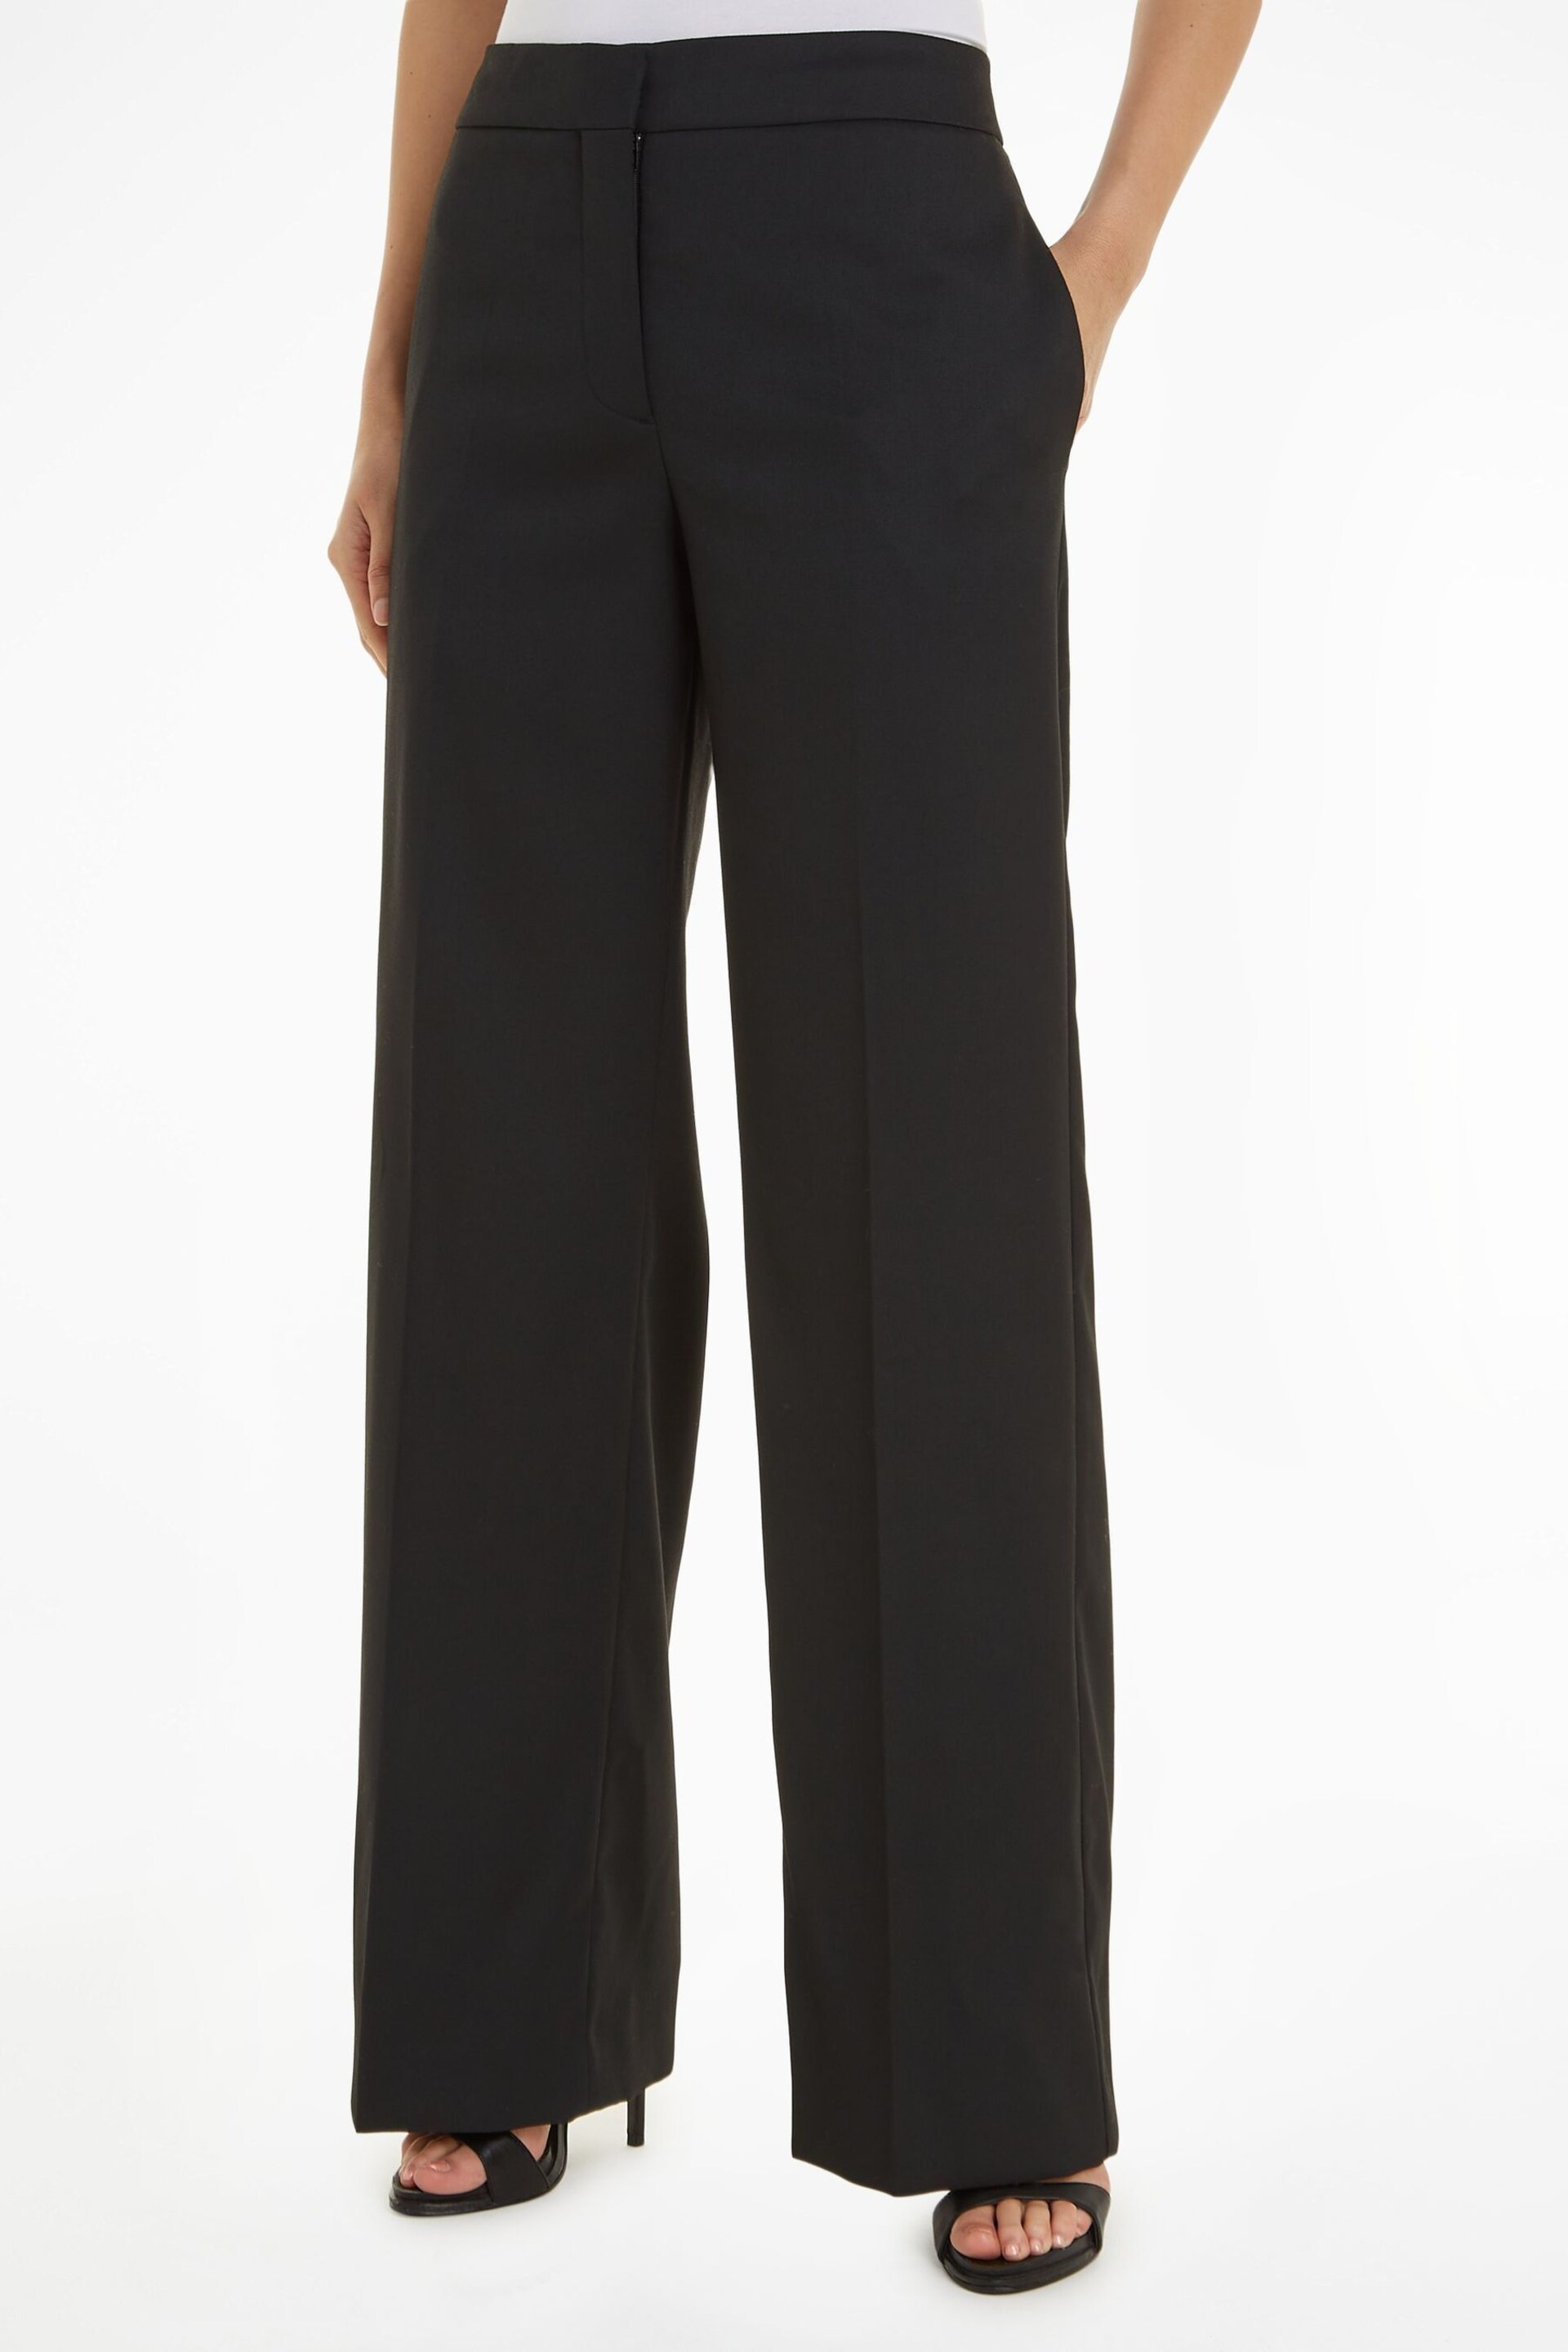 Calvin Klein Black Tailored Wide Leg Trousers - Image 1 of 6